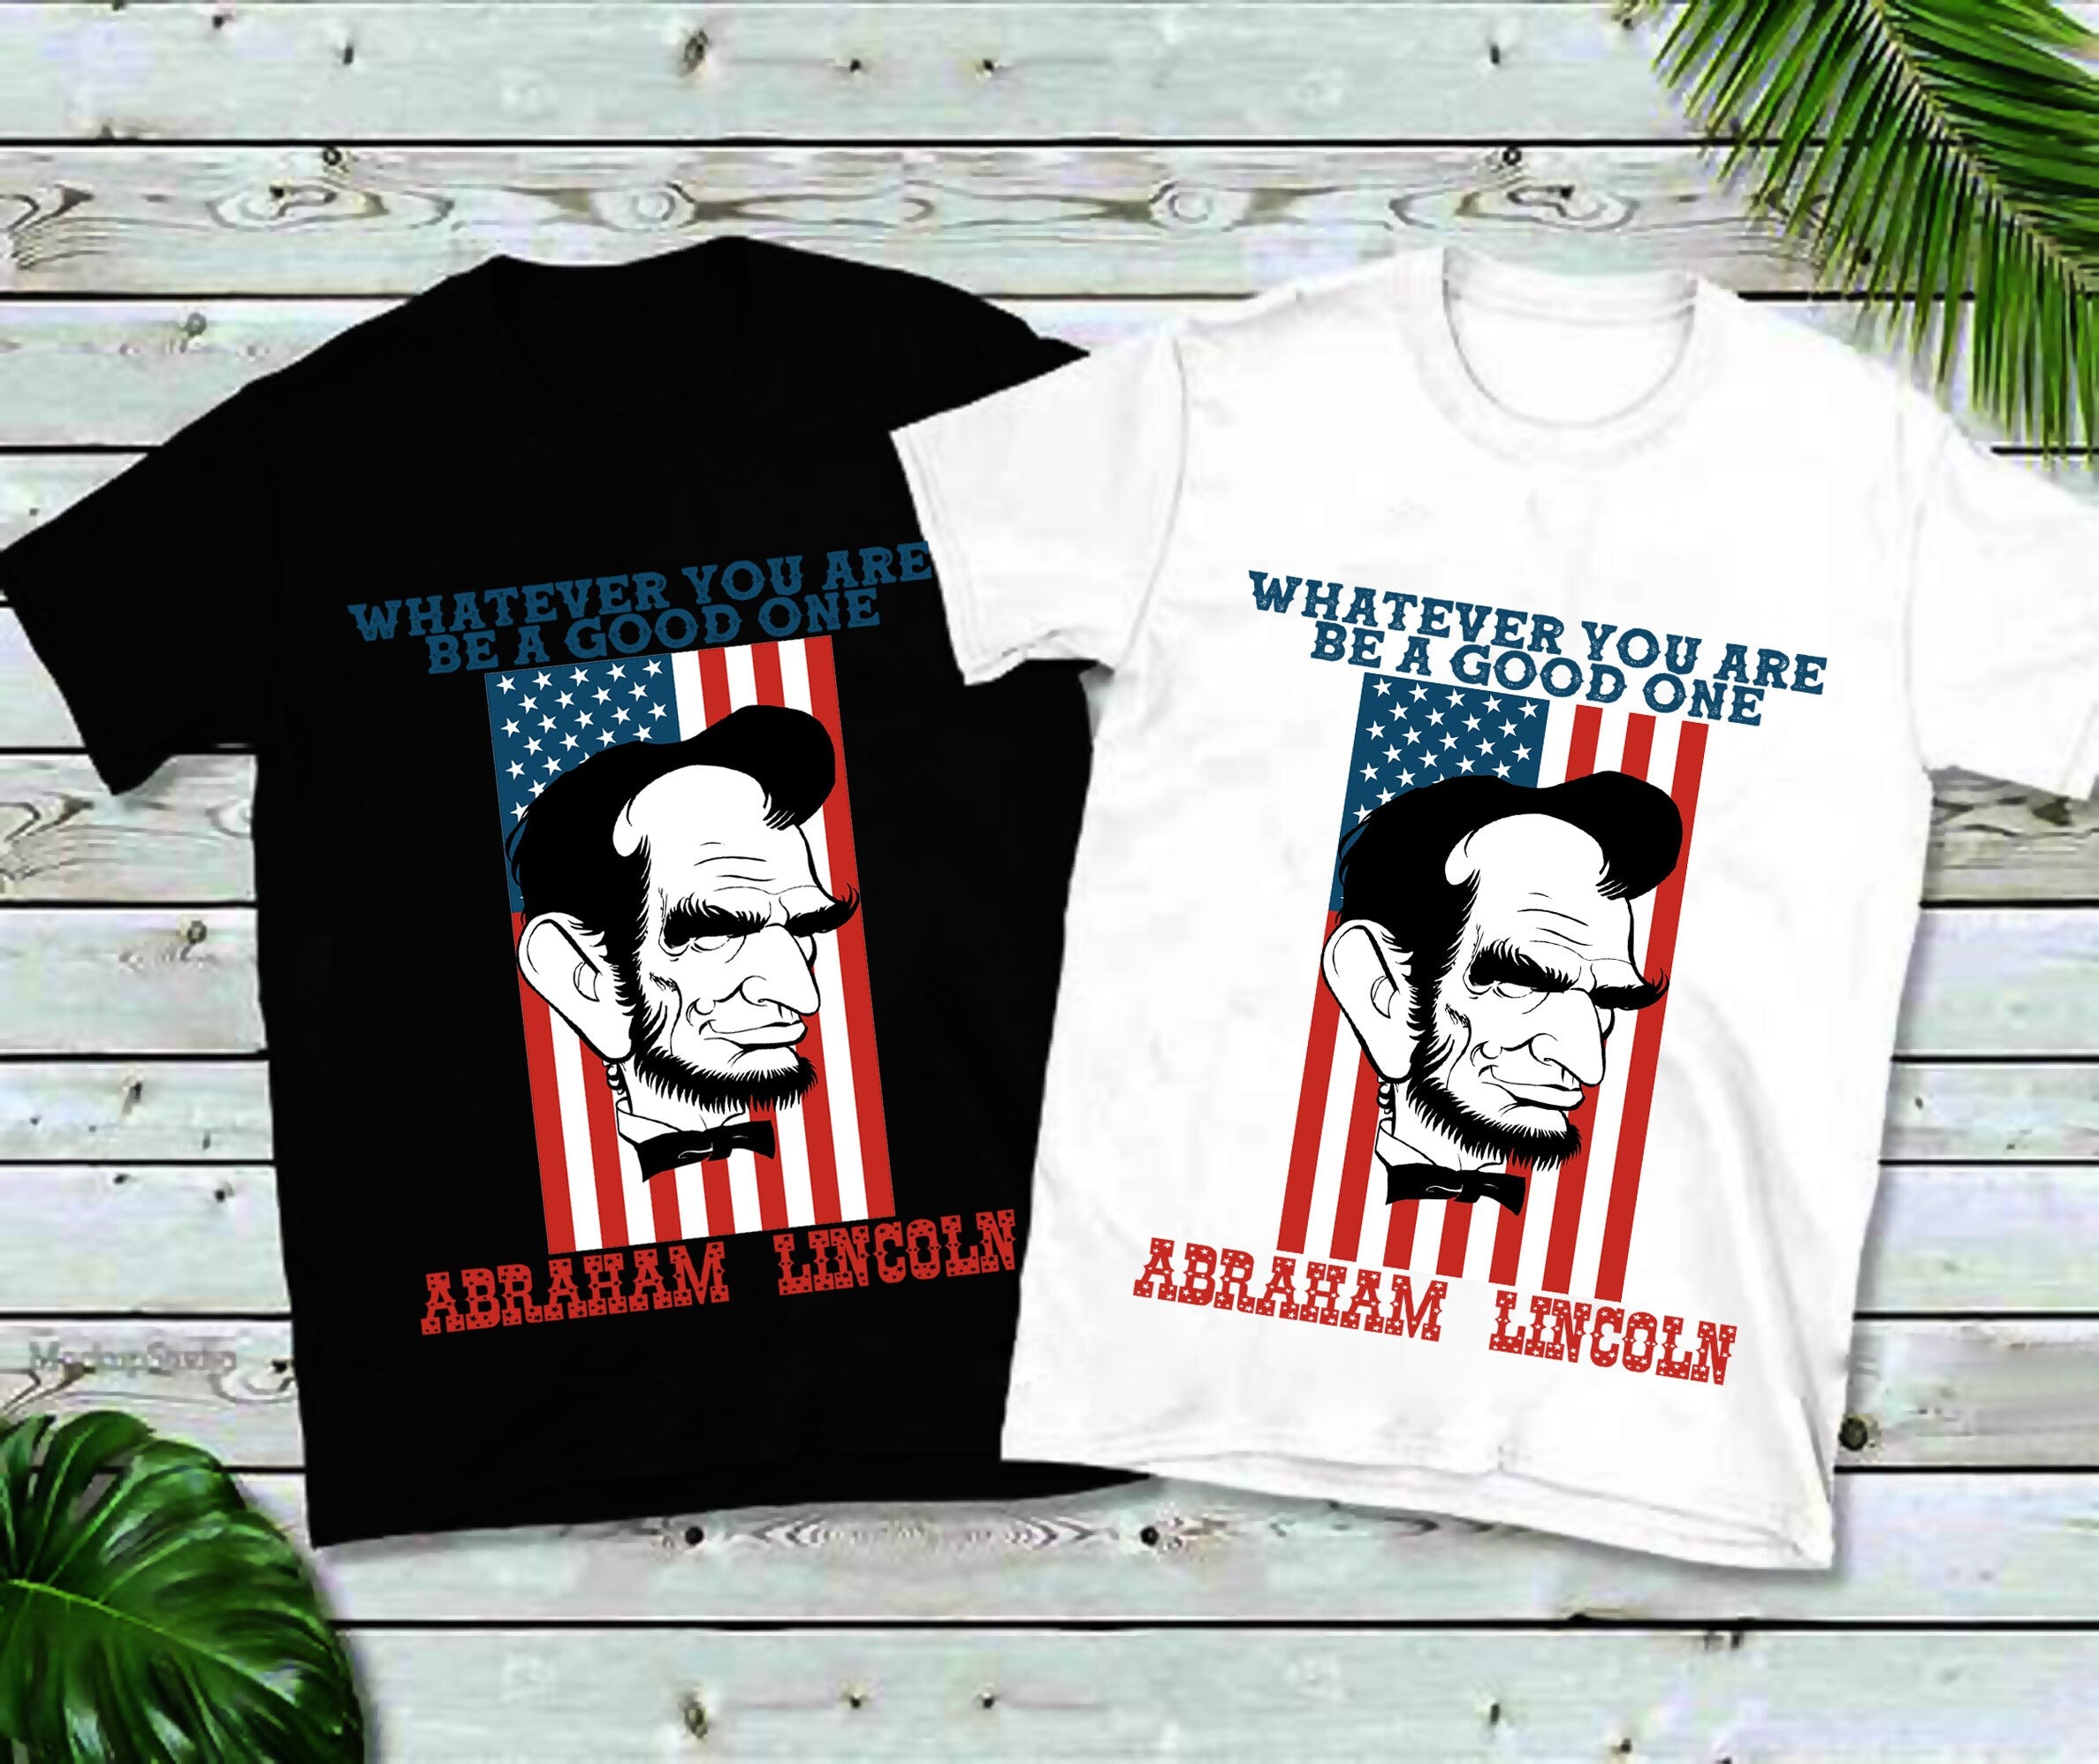 Whatever You Are Be A Good One, Abraham Lincoln T-skjorter, America Shirt, America, 4th of July Tee, Unisex Sized, USA, Abe Lincoln, Patriotic - plusminusco.com